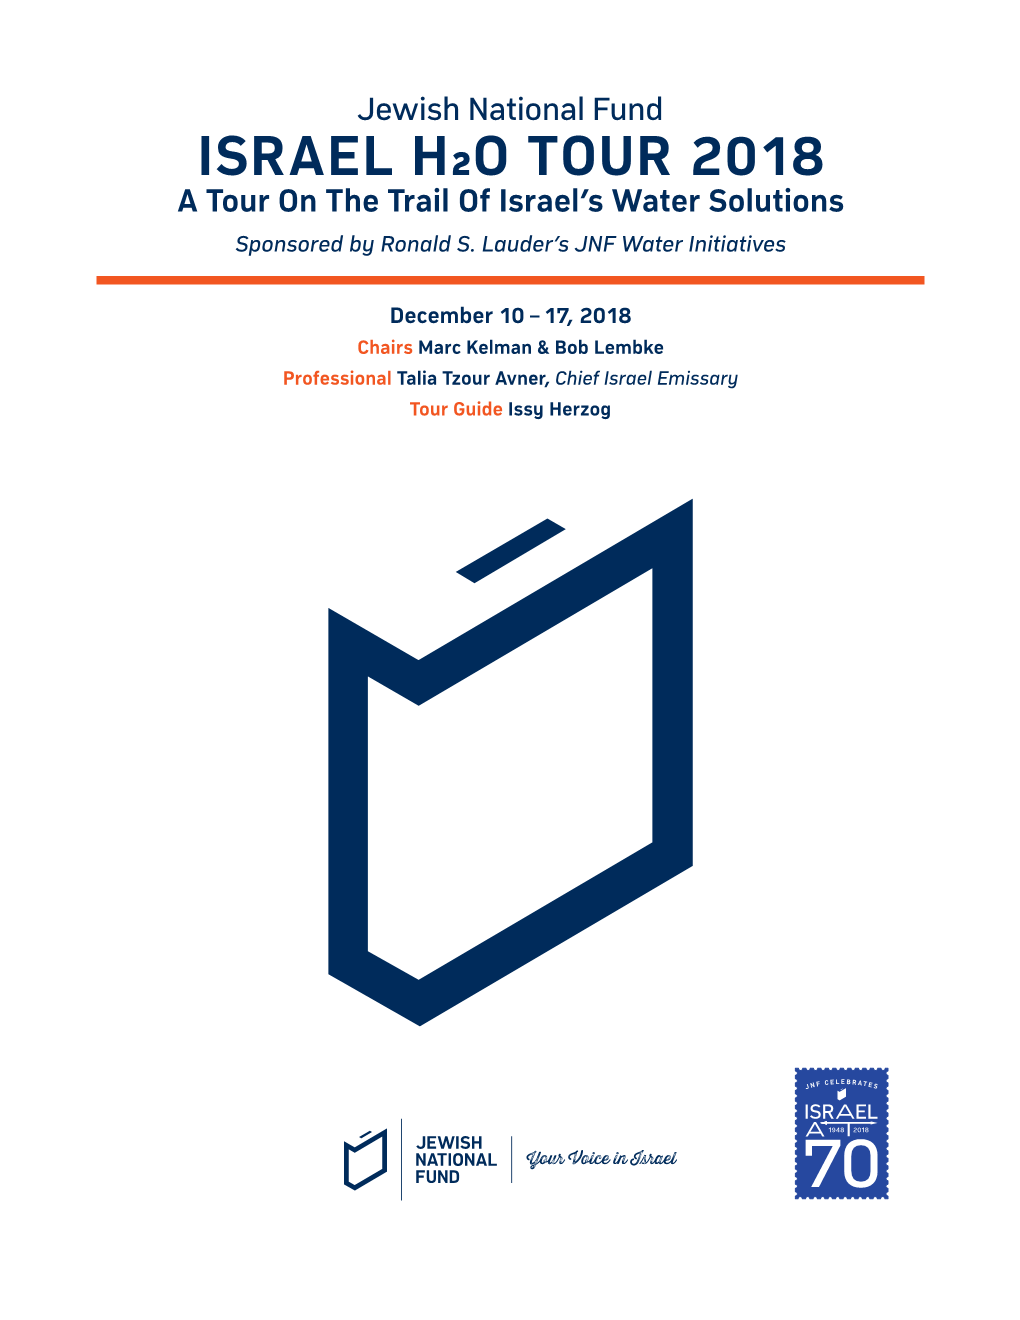 ISRAEL H2O TOUR 2018 a Tour on the Trail of Israel’S Water Solutions Sponsored by Ronald S